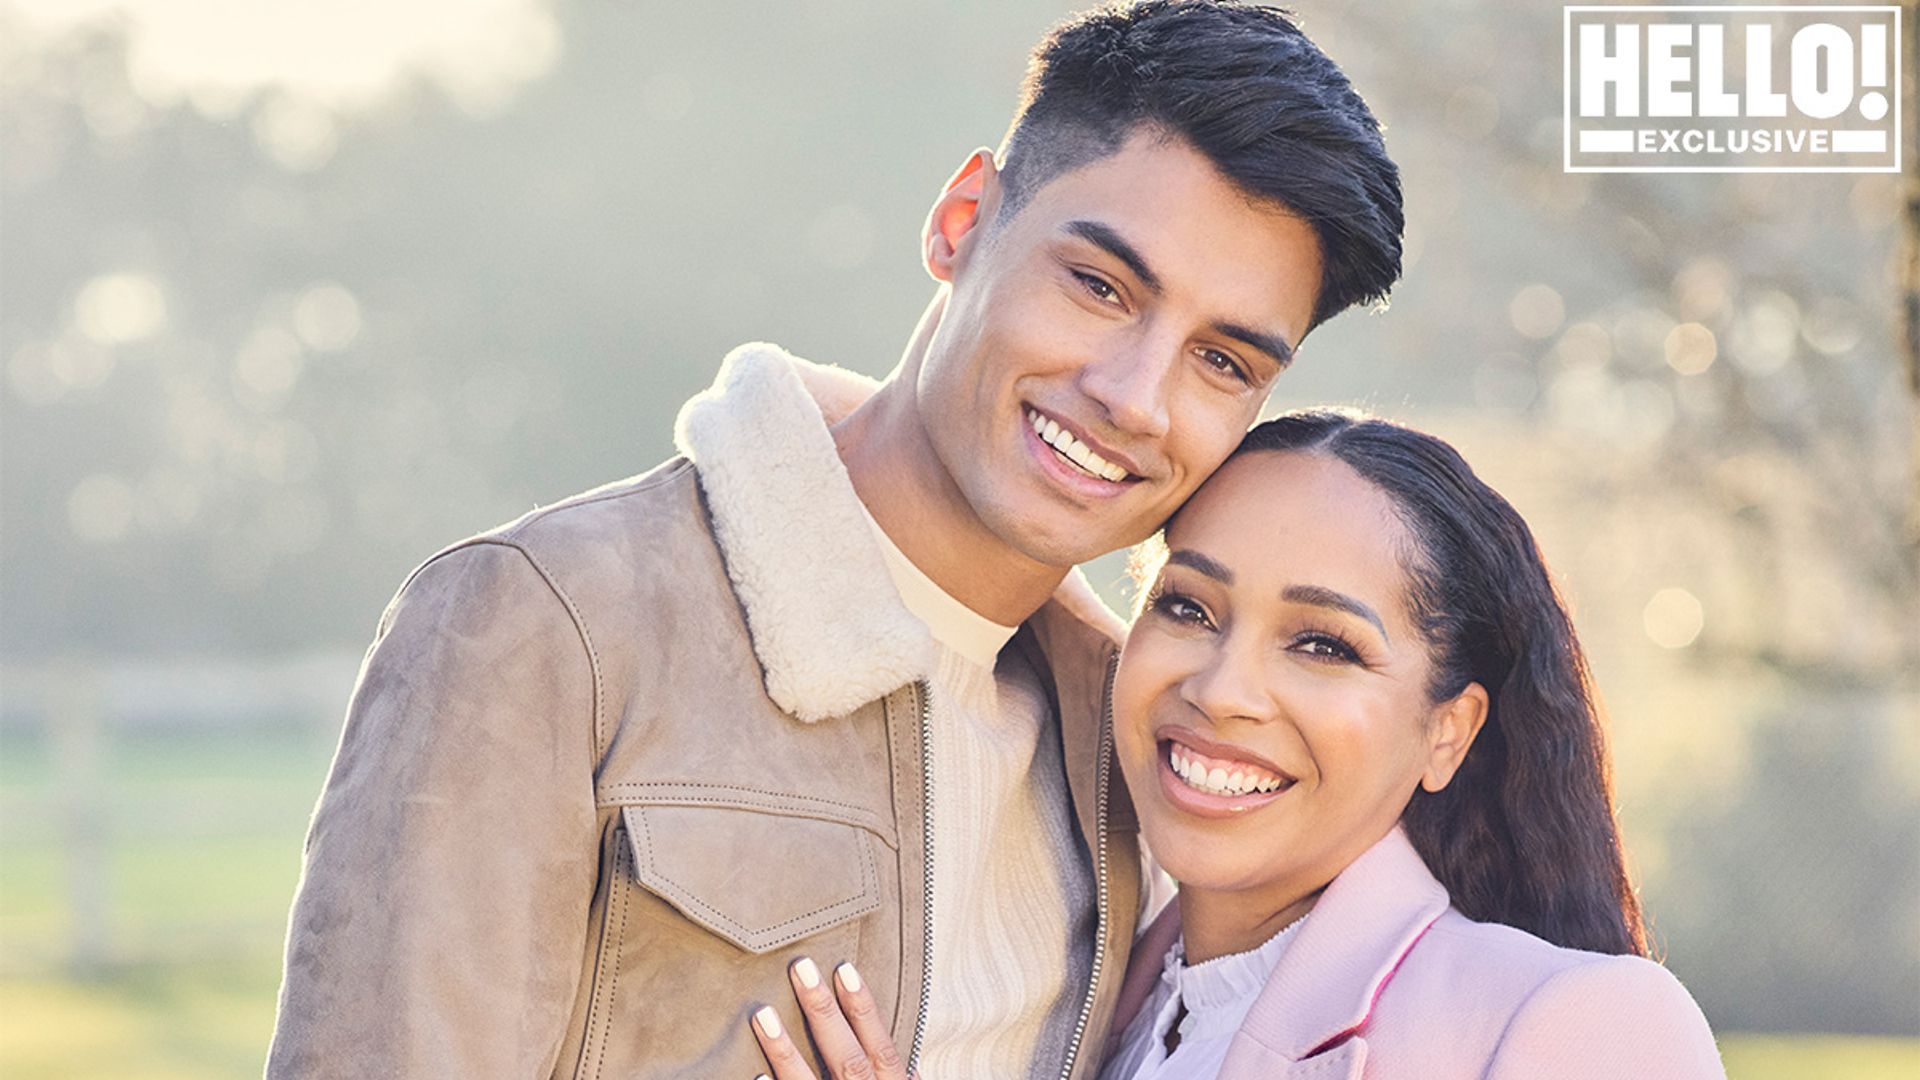 Exclusive: The Wanted's Siva Kaneswaran reveals exciting wedding news - nearly 10 years after getting engaged